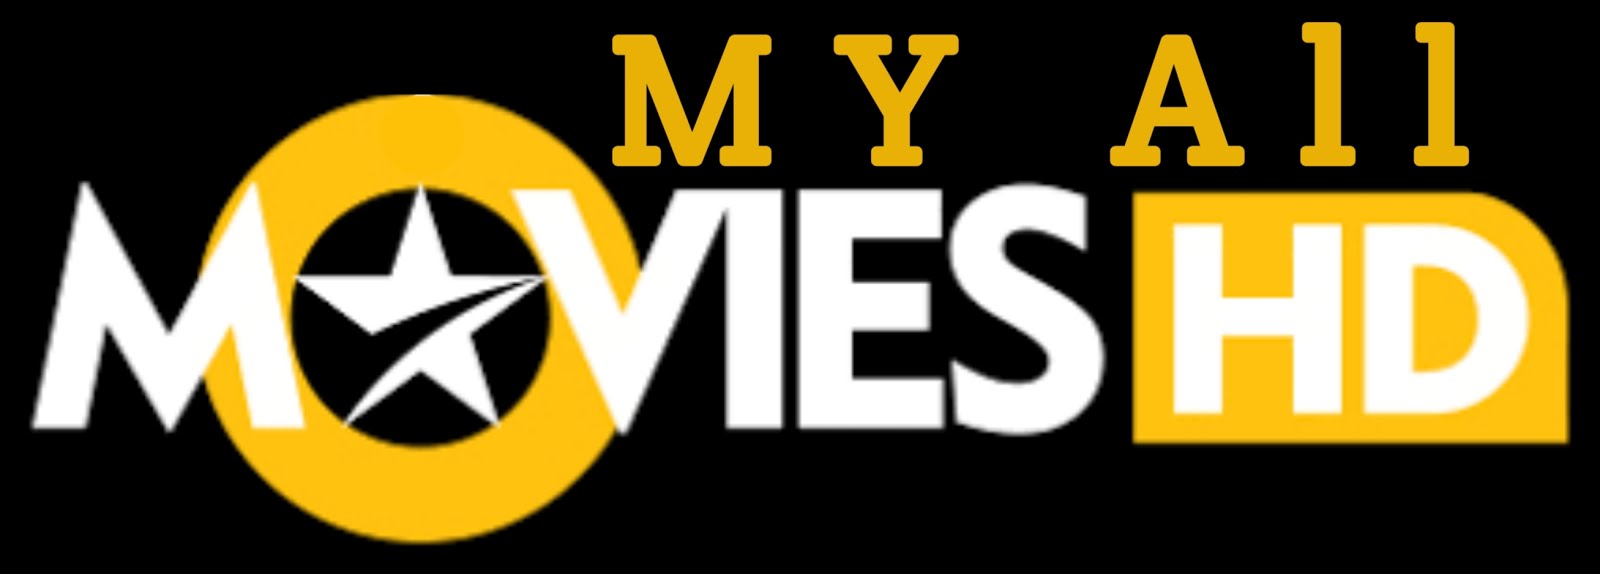 My All Movies HD